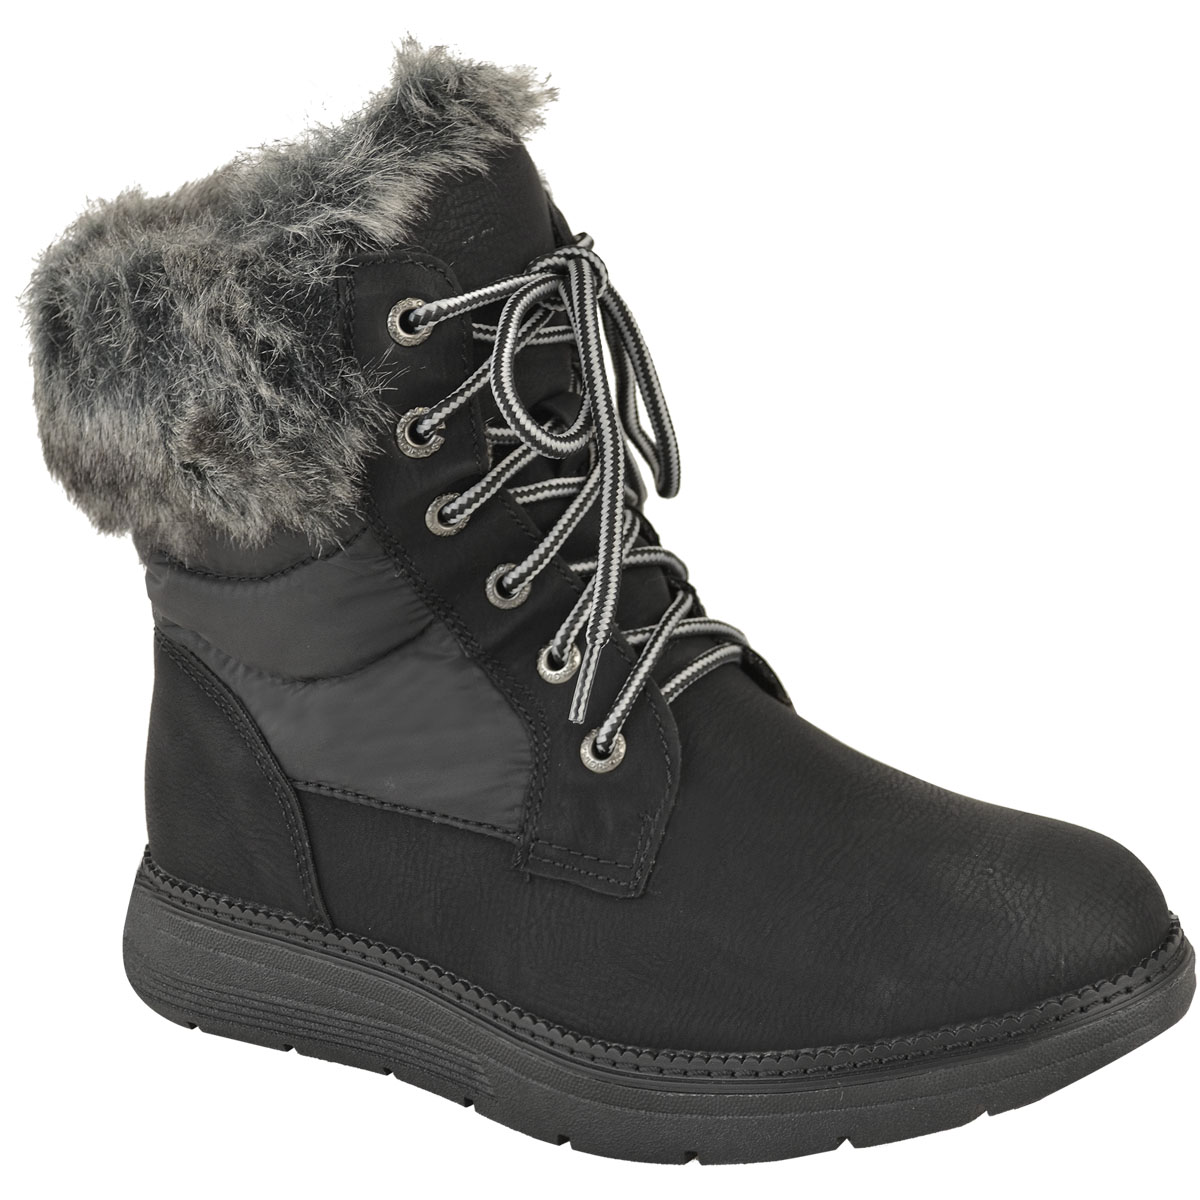 WOMENS WINTER ANKLE BOOTS WARM FUR LINED WALKING COMFOR LACE UP LADIES ...